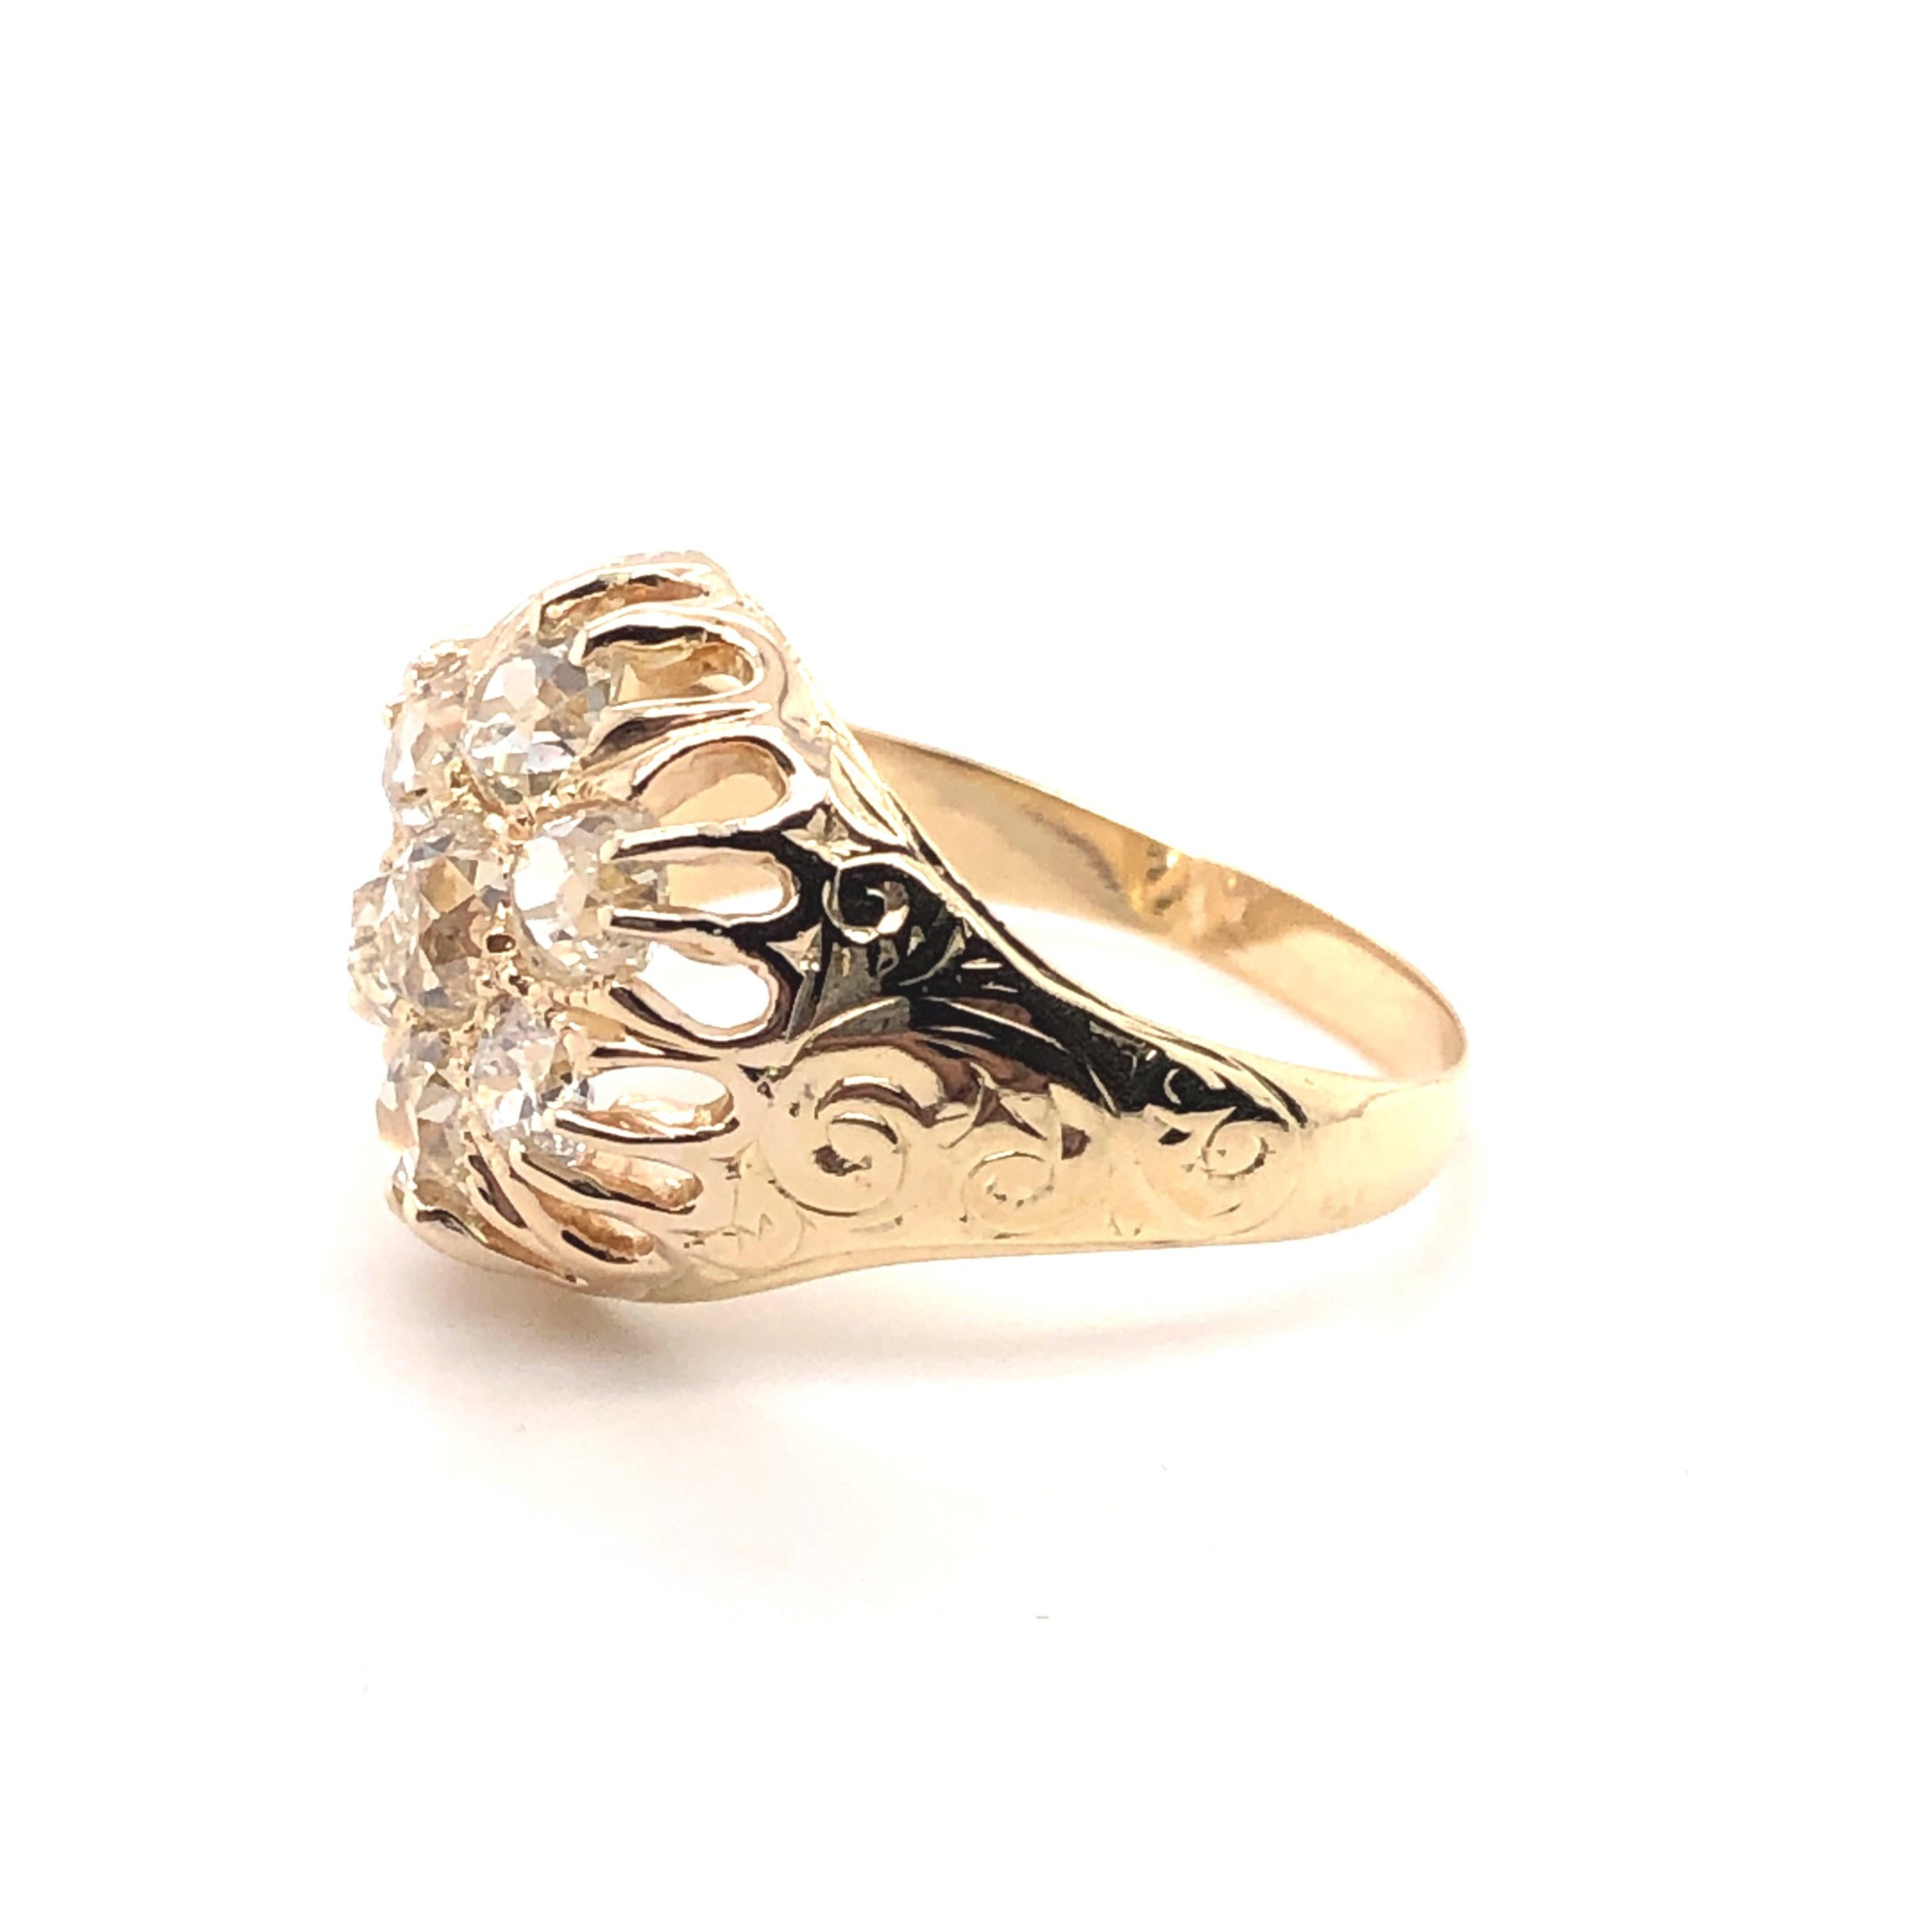 14kt yellow gold cigar style band with engraved sides. The center contains approximately 1.48 total carats of Old Mine Cut diamonds. The diamonds appear to possess H-I color and SI-SI2 clarity. This ring is a finger size 8 and can be resized. The